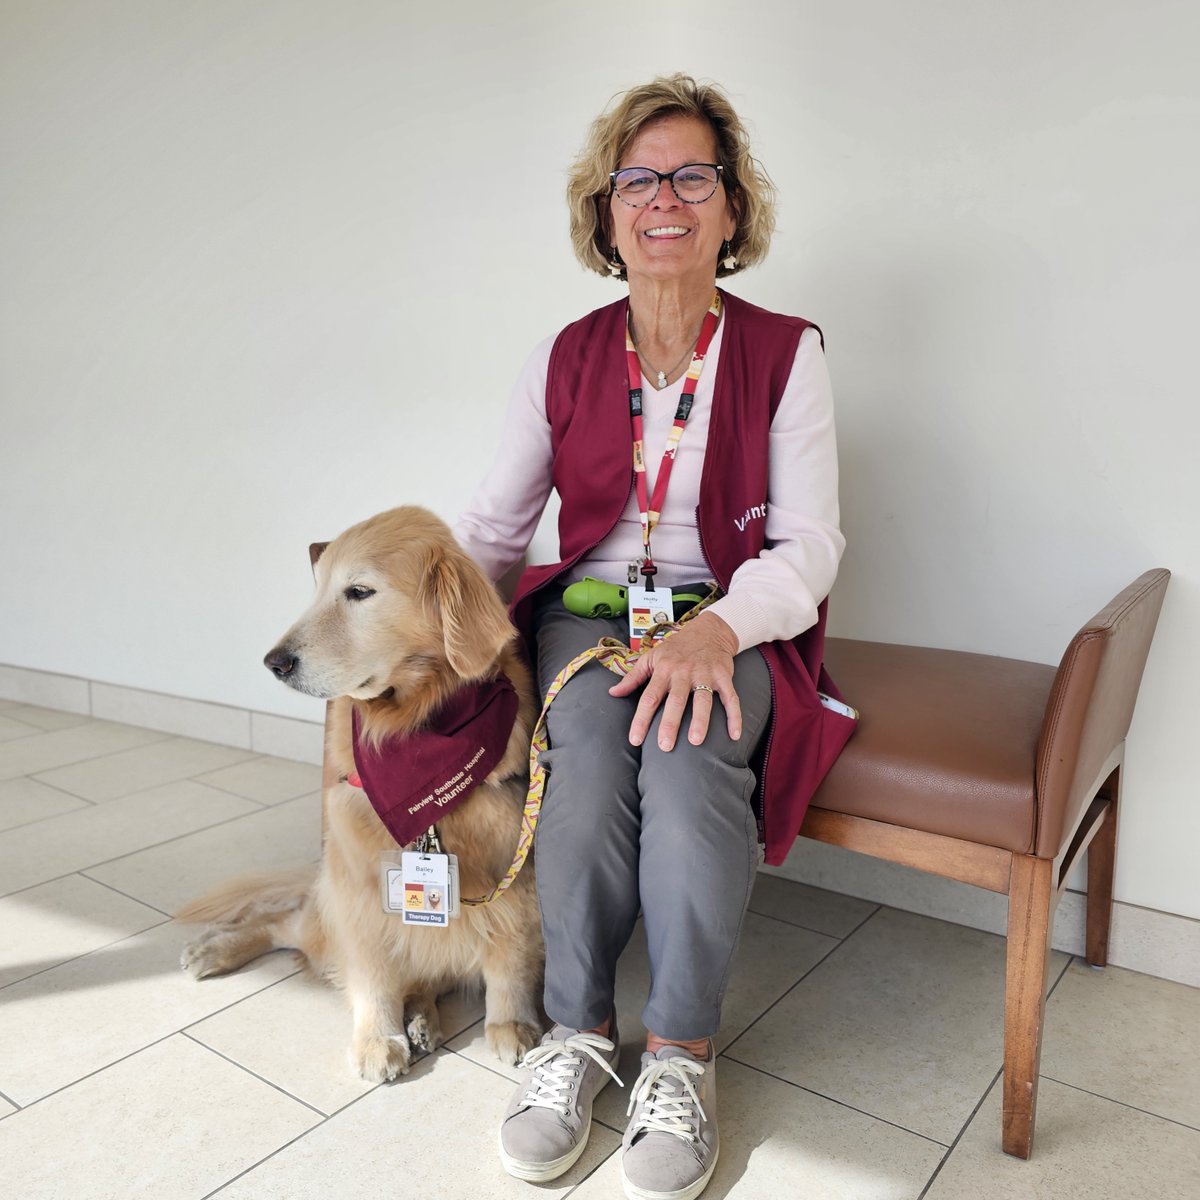 Every Friday, Holly Parker and @baileytherapy13 volunteer at M Health Fairview Southdale Hospital, where they lift the spirits of patients, visitors, and staff. “She was born to do this,” Holly said. During #NationalVolunteerWeek, help us thank all of our volunteers! ♥️